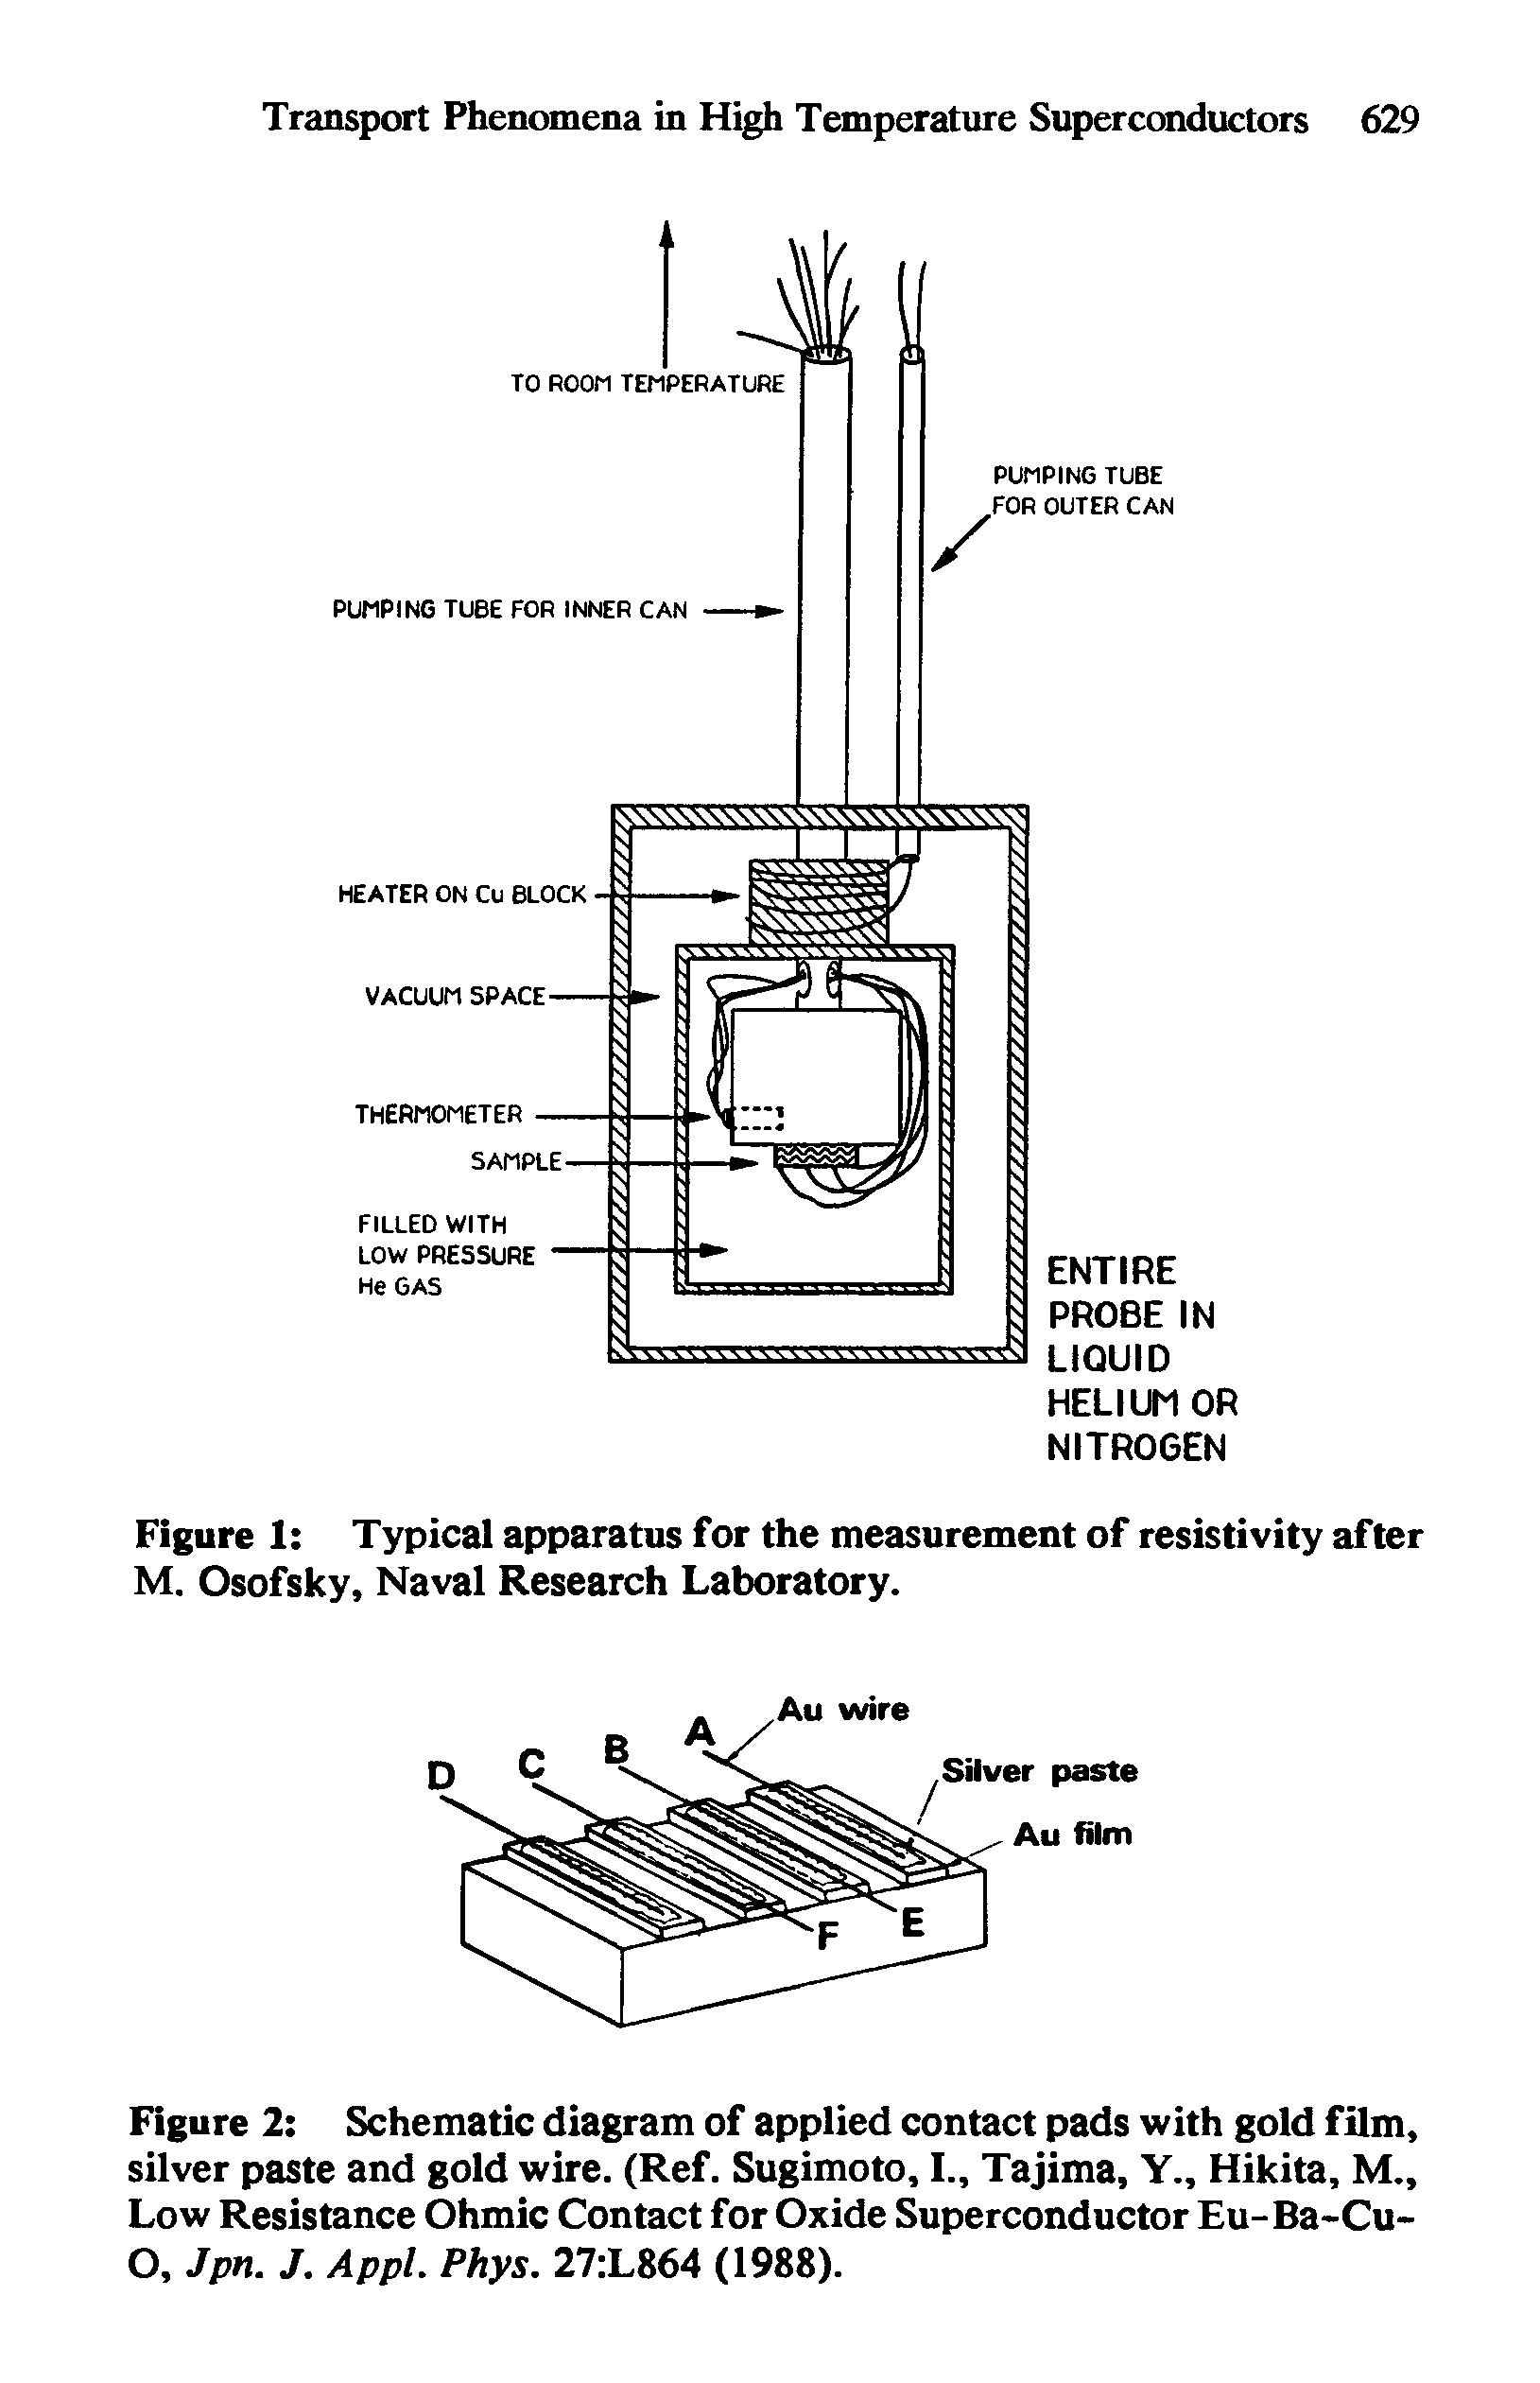 Figure 1 Typical apparatus for the measurement of resistivity after M. Osofsky, Naval Research Laboratory.